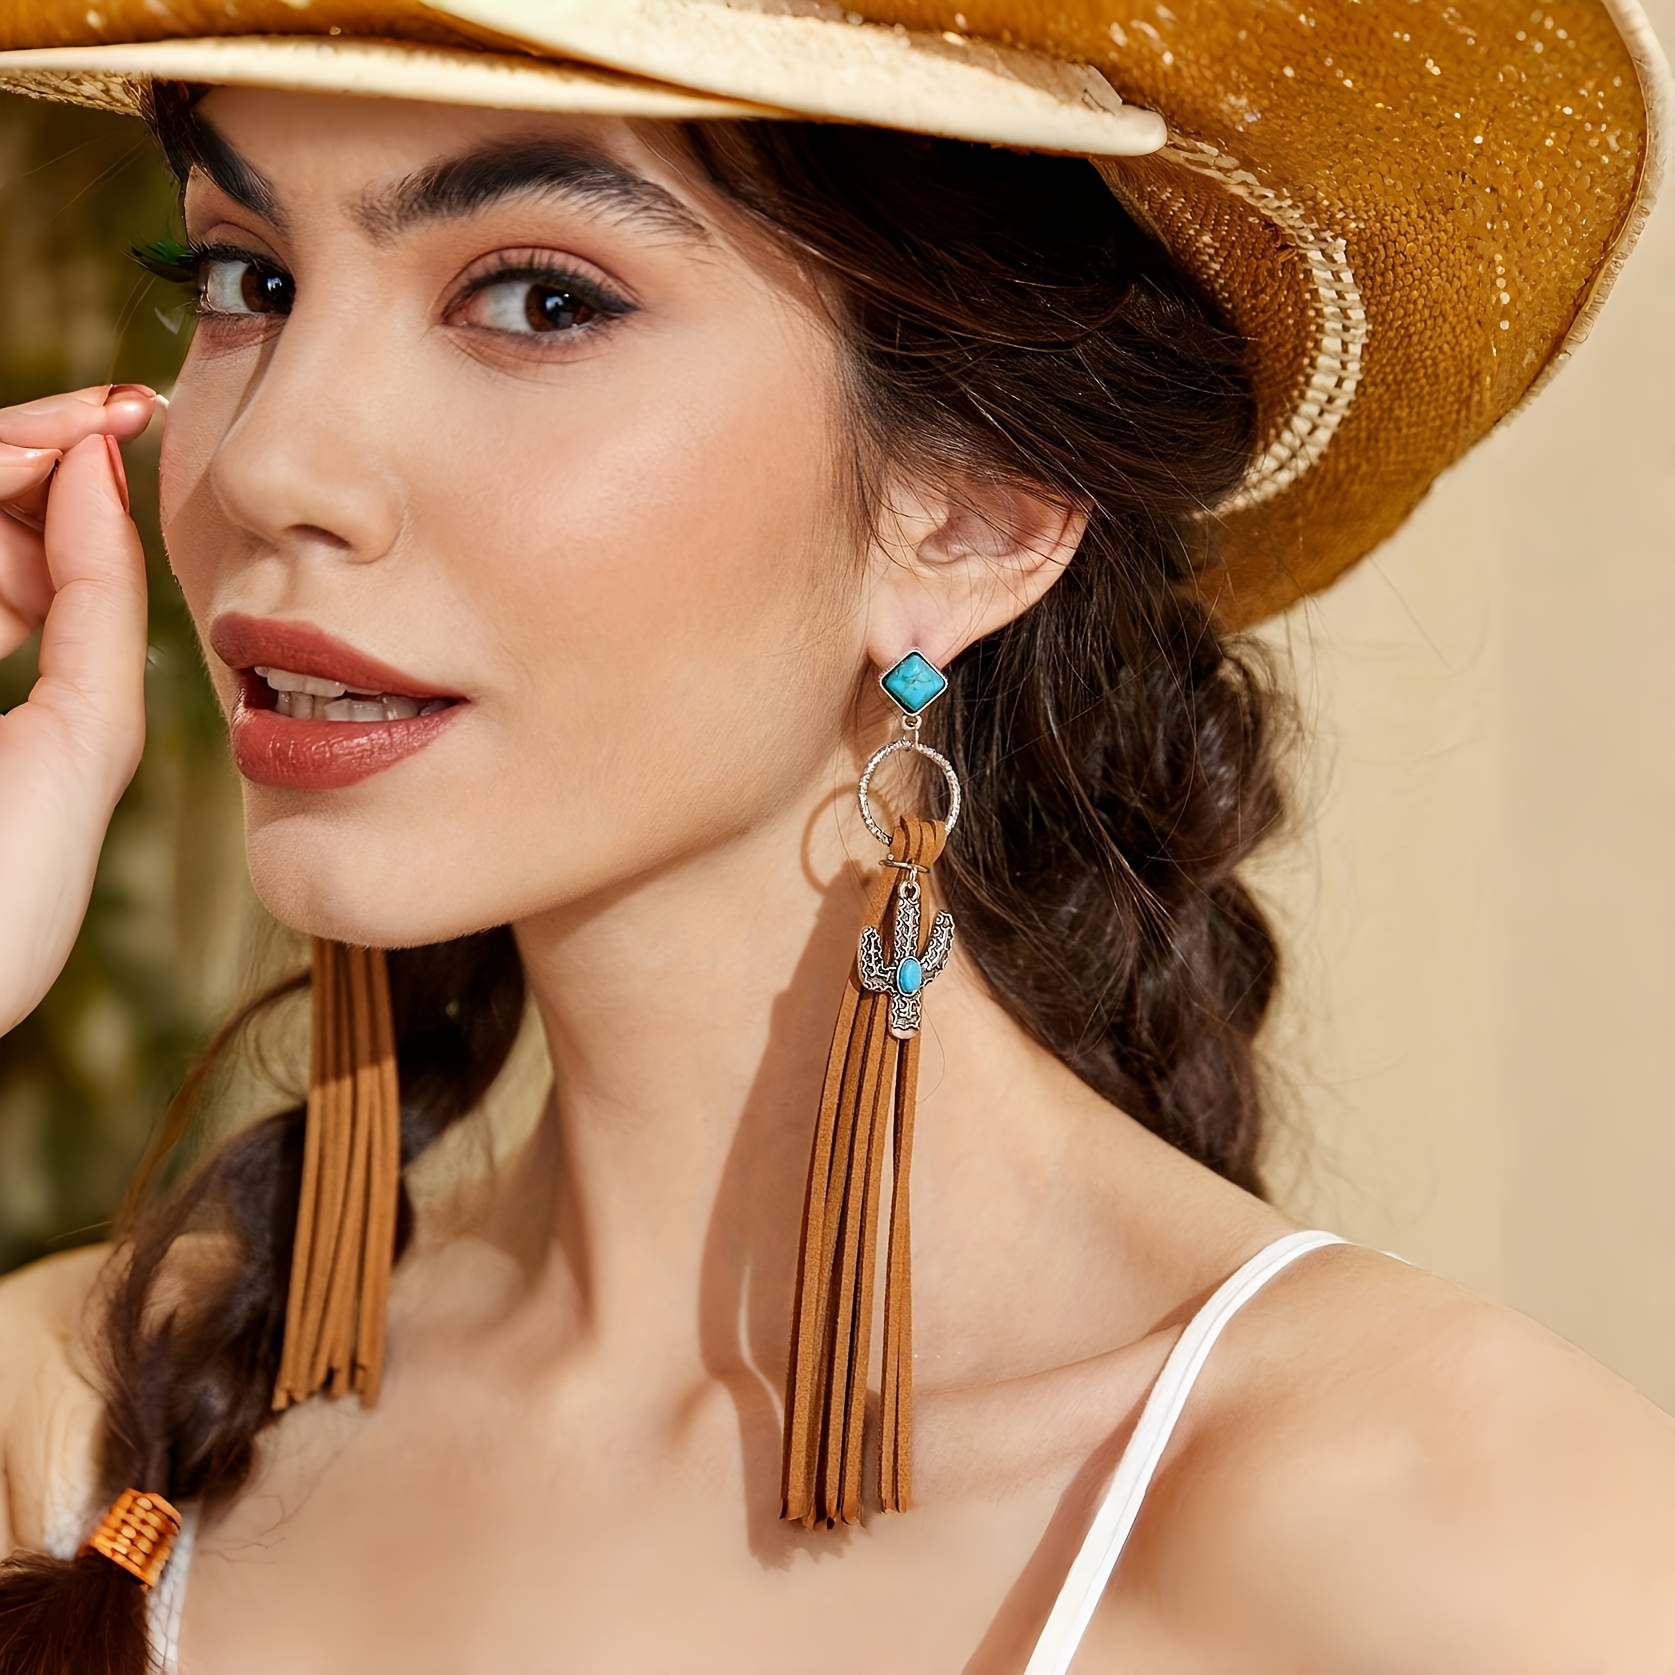 

Long Tassel Dangle Earrings Inlaid With Turquoise & Artificial Leather Bohemian Cowboy Style Unique Statement Ear Decor